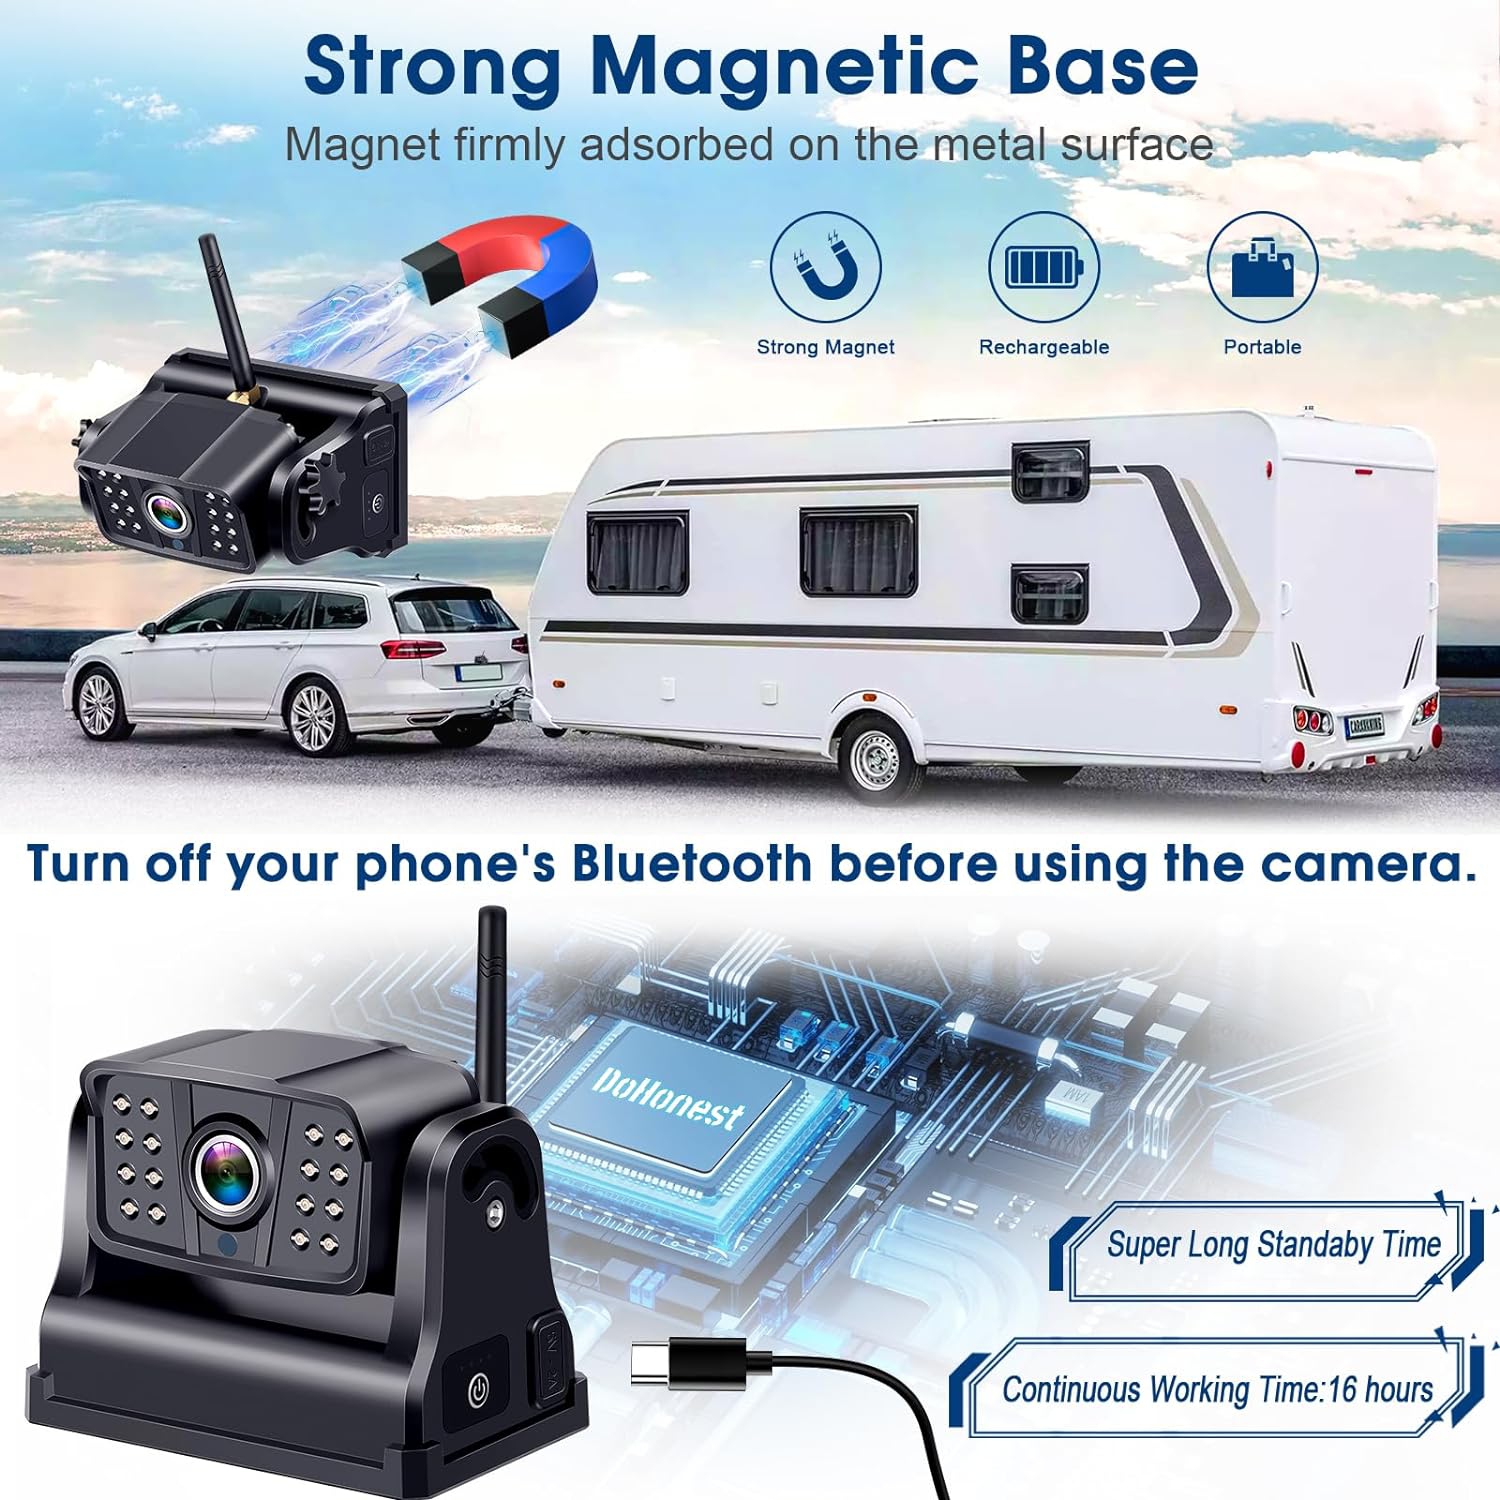 HD 1080P Wireless Backup Camera: Magnetic WiFi Rechargeable Rear